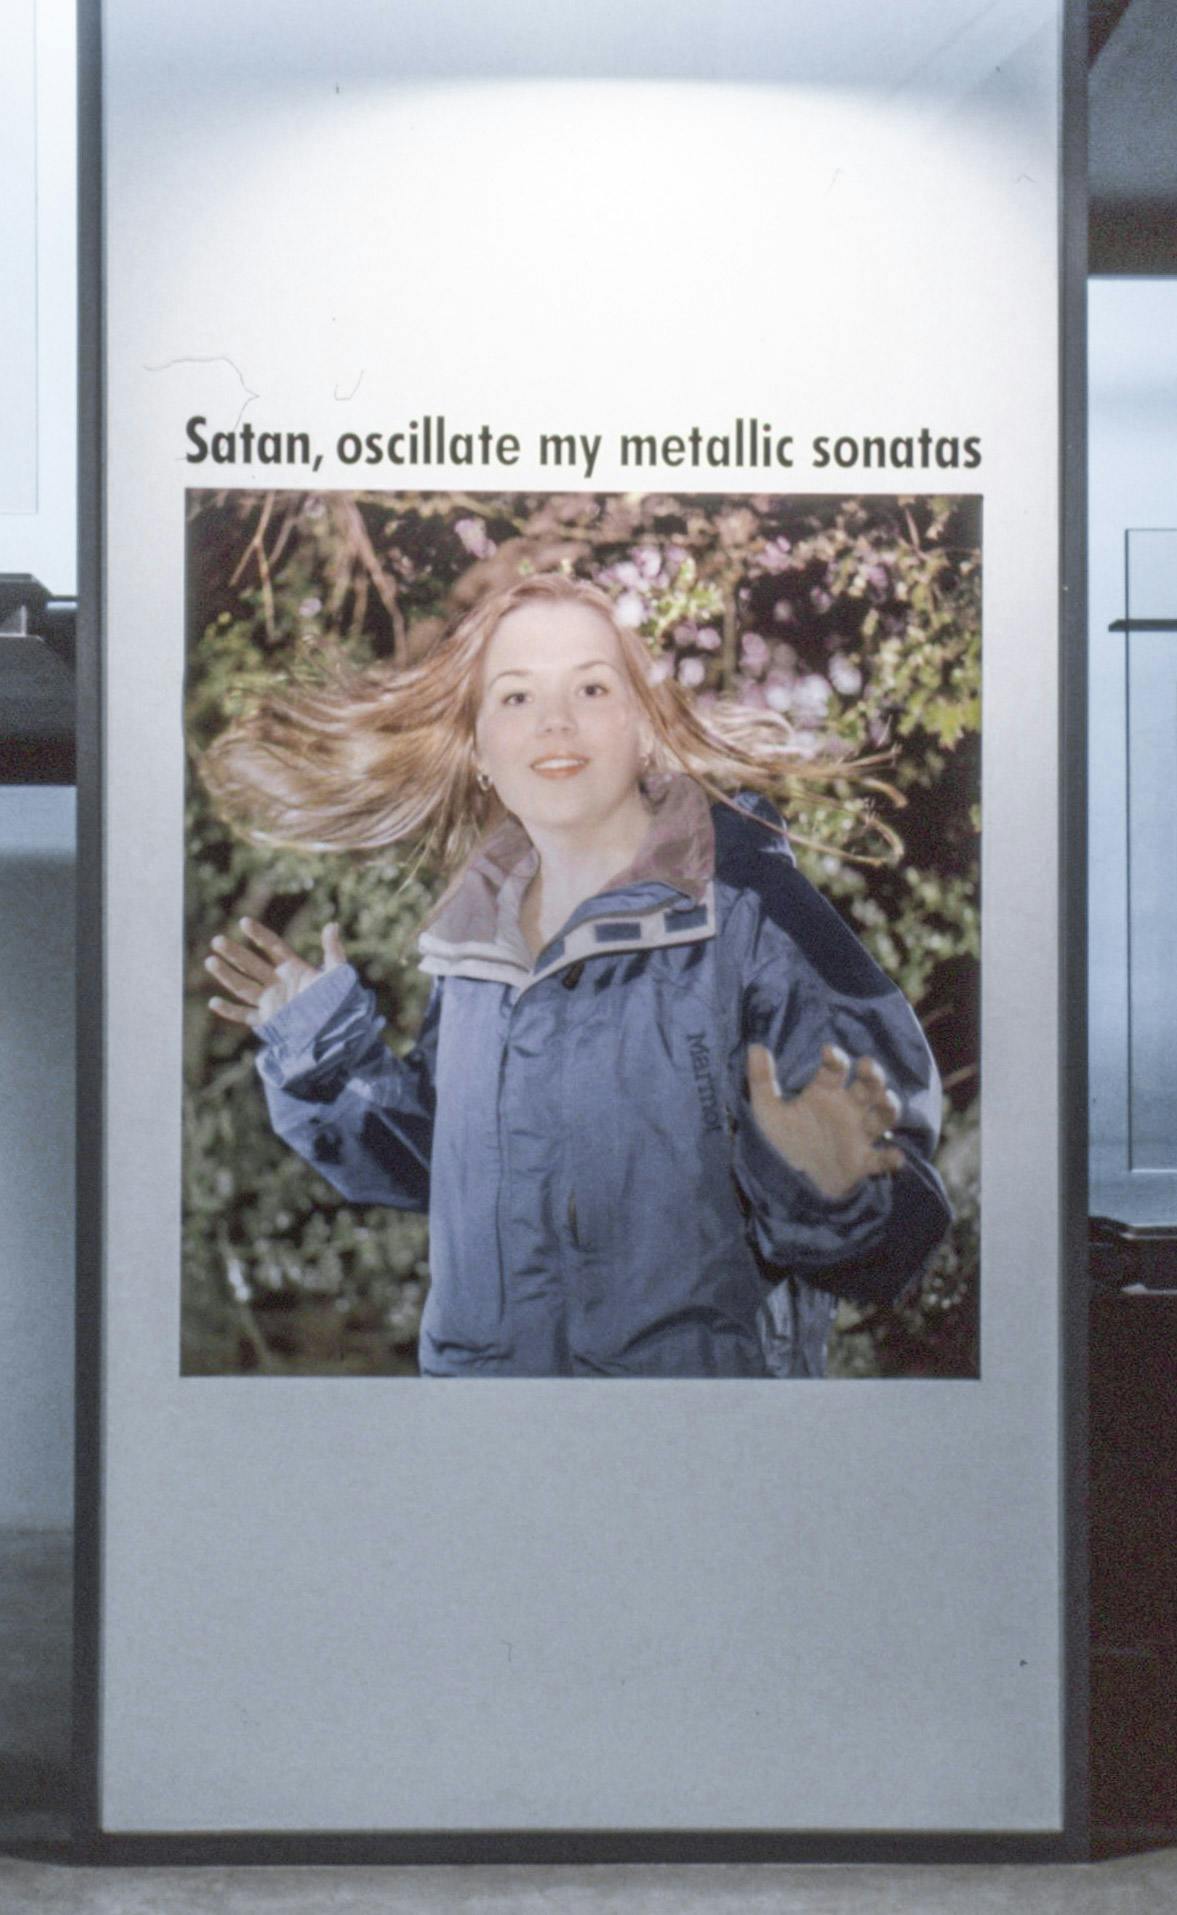 This photograph documents the entrance of the exhibition titled Satan, oscillate my metallic sonatas. A photograph of a woman standing in a forest is installed below the exhibition title. 